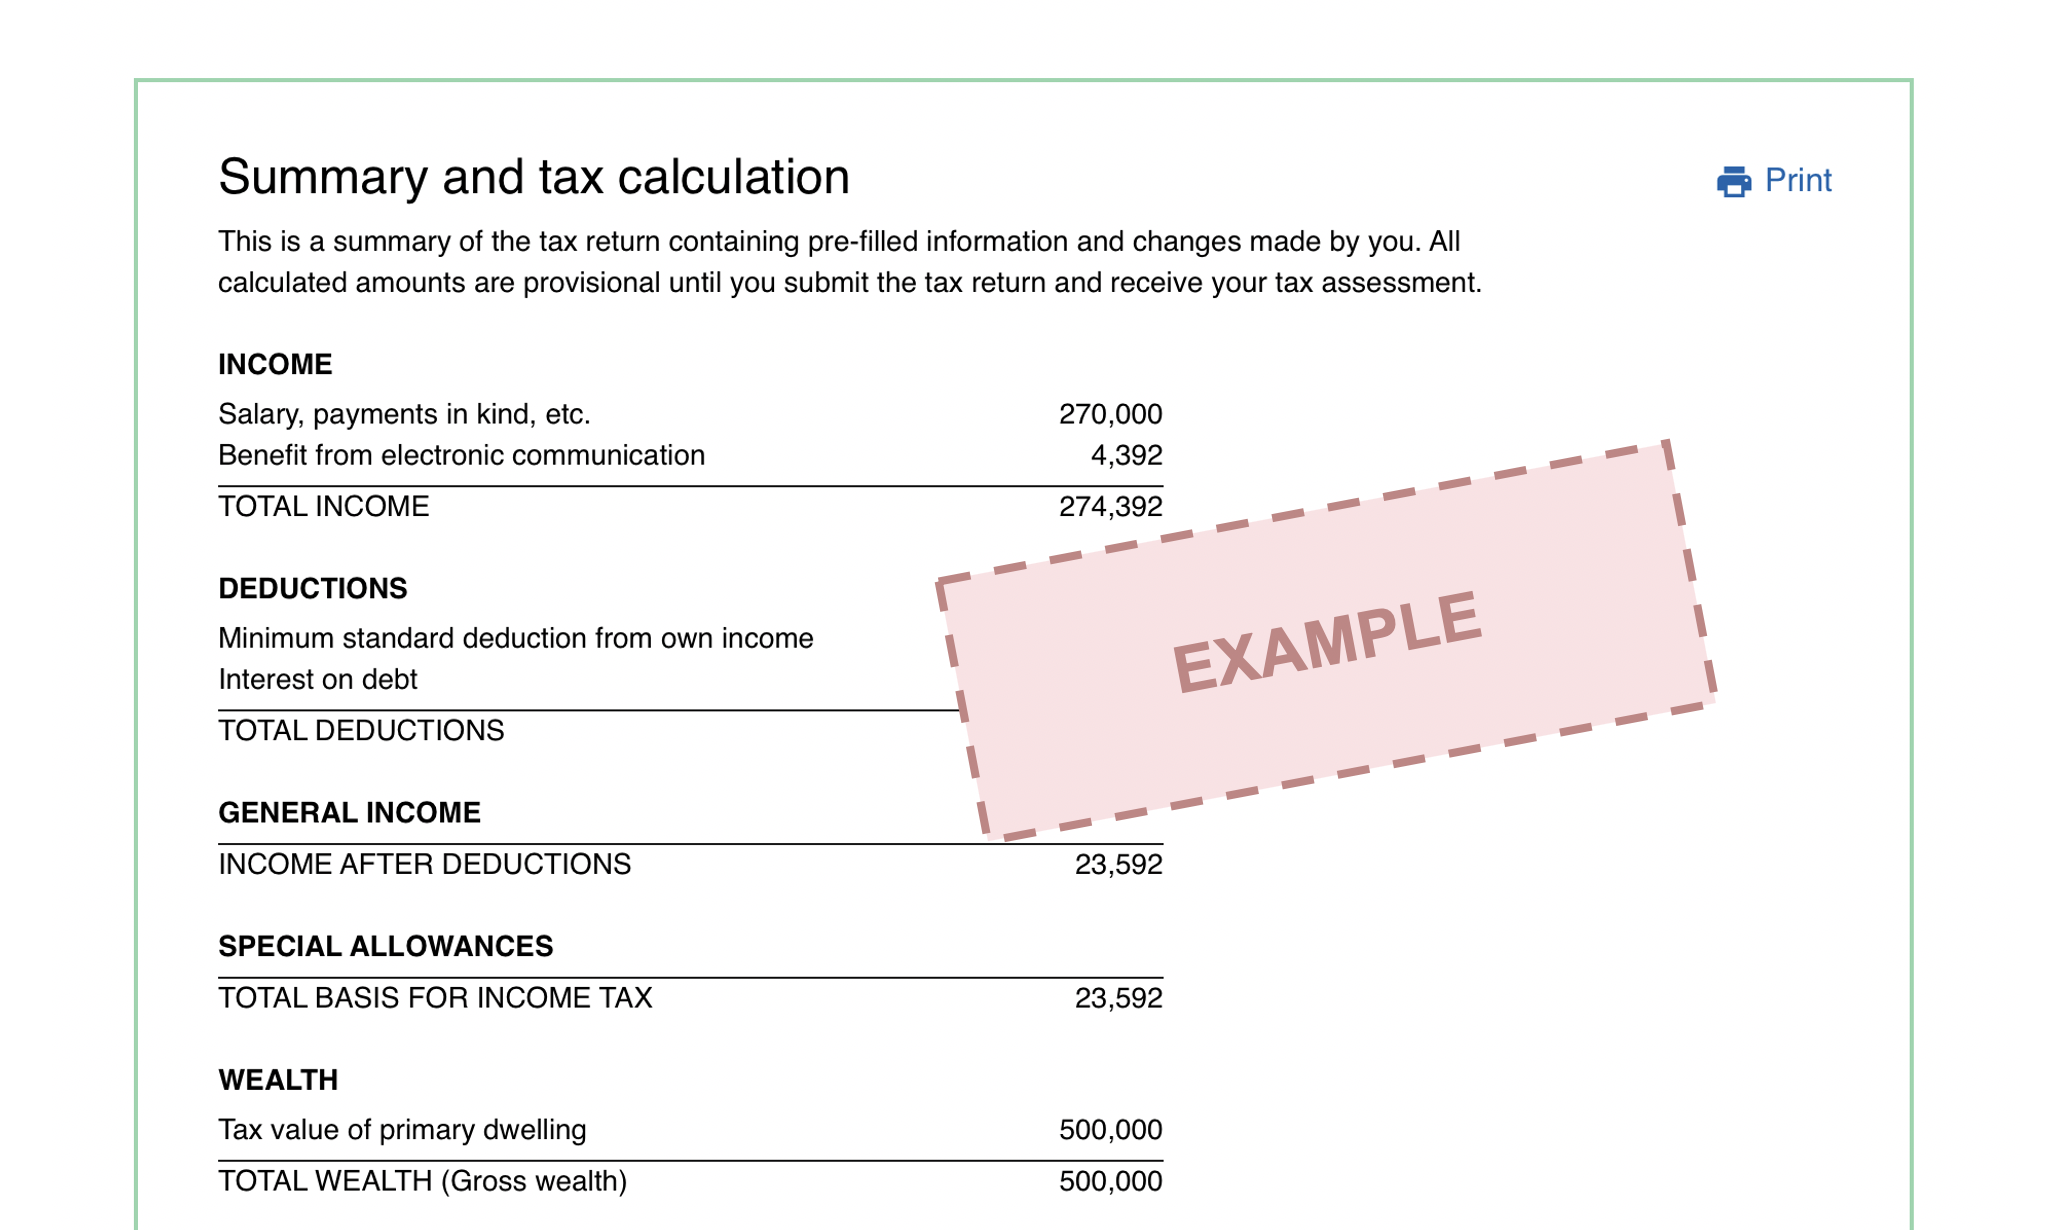 We summarize all of your tax affairs at the bottom of the tax return